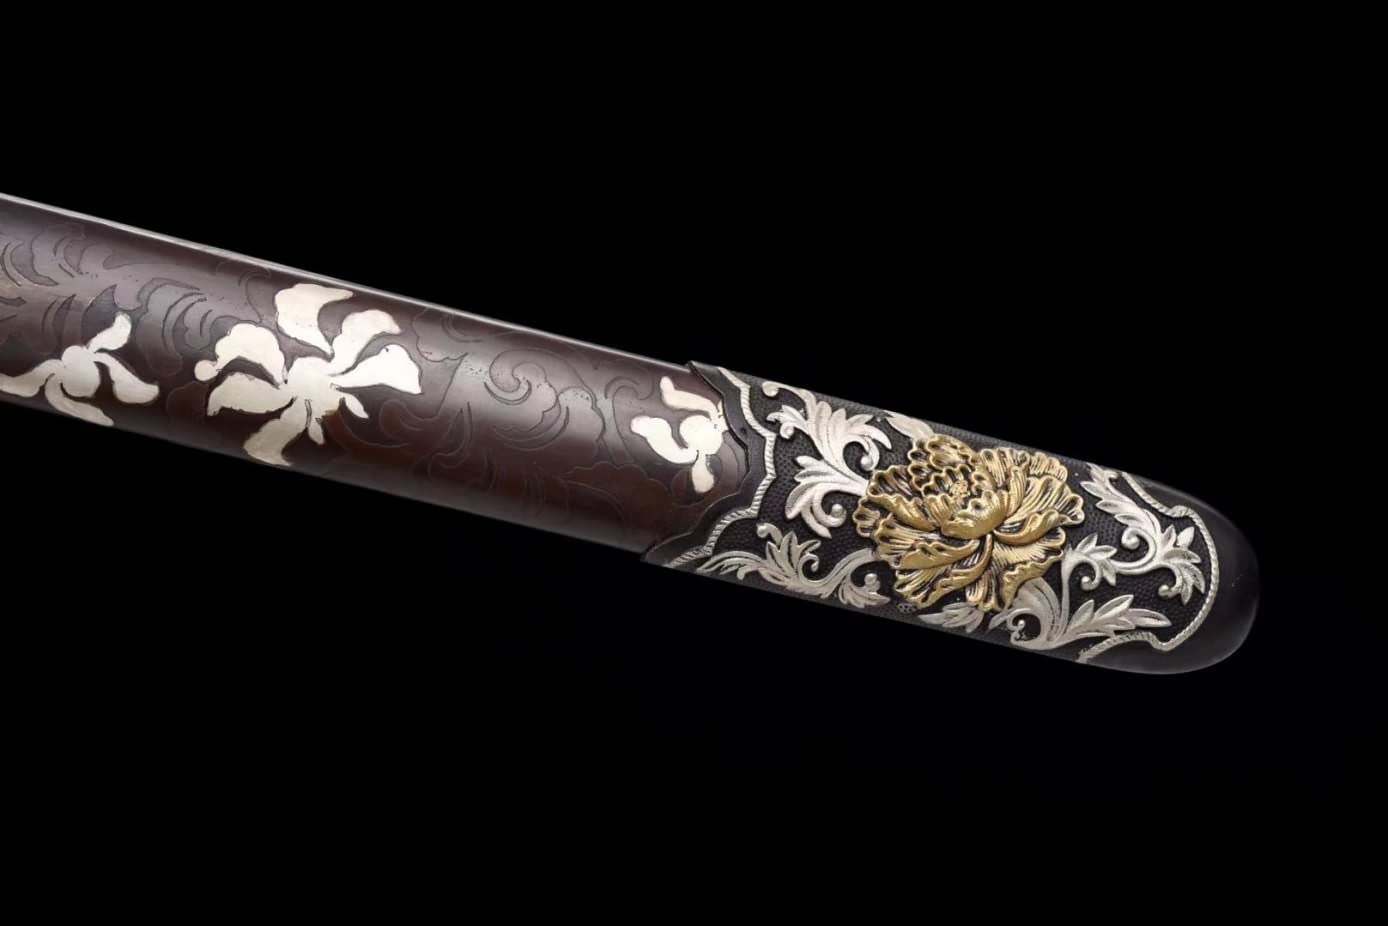 LOONGSWORD,Peony Sword Real,Forged Damascus Steel Blades,Brass Scabbard